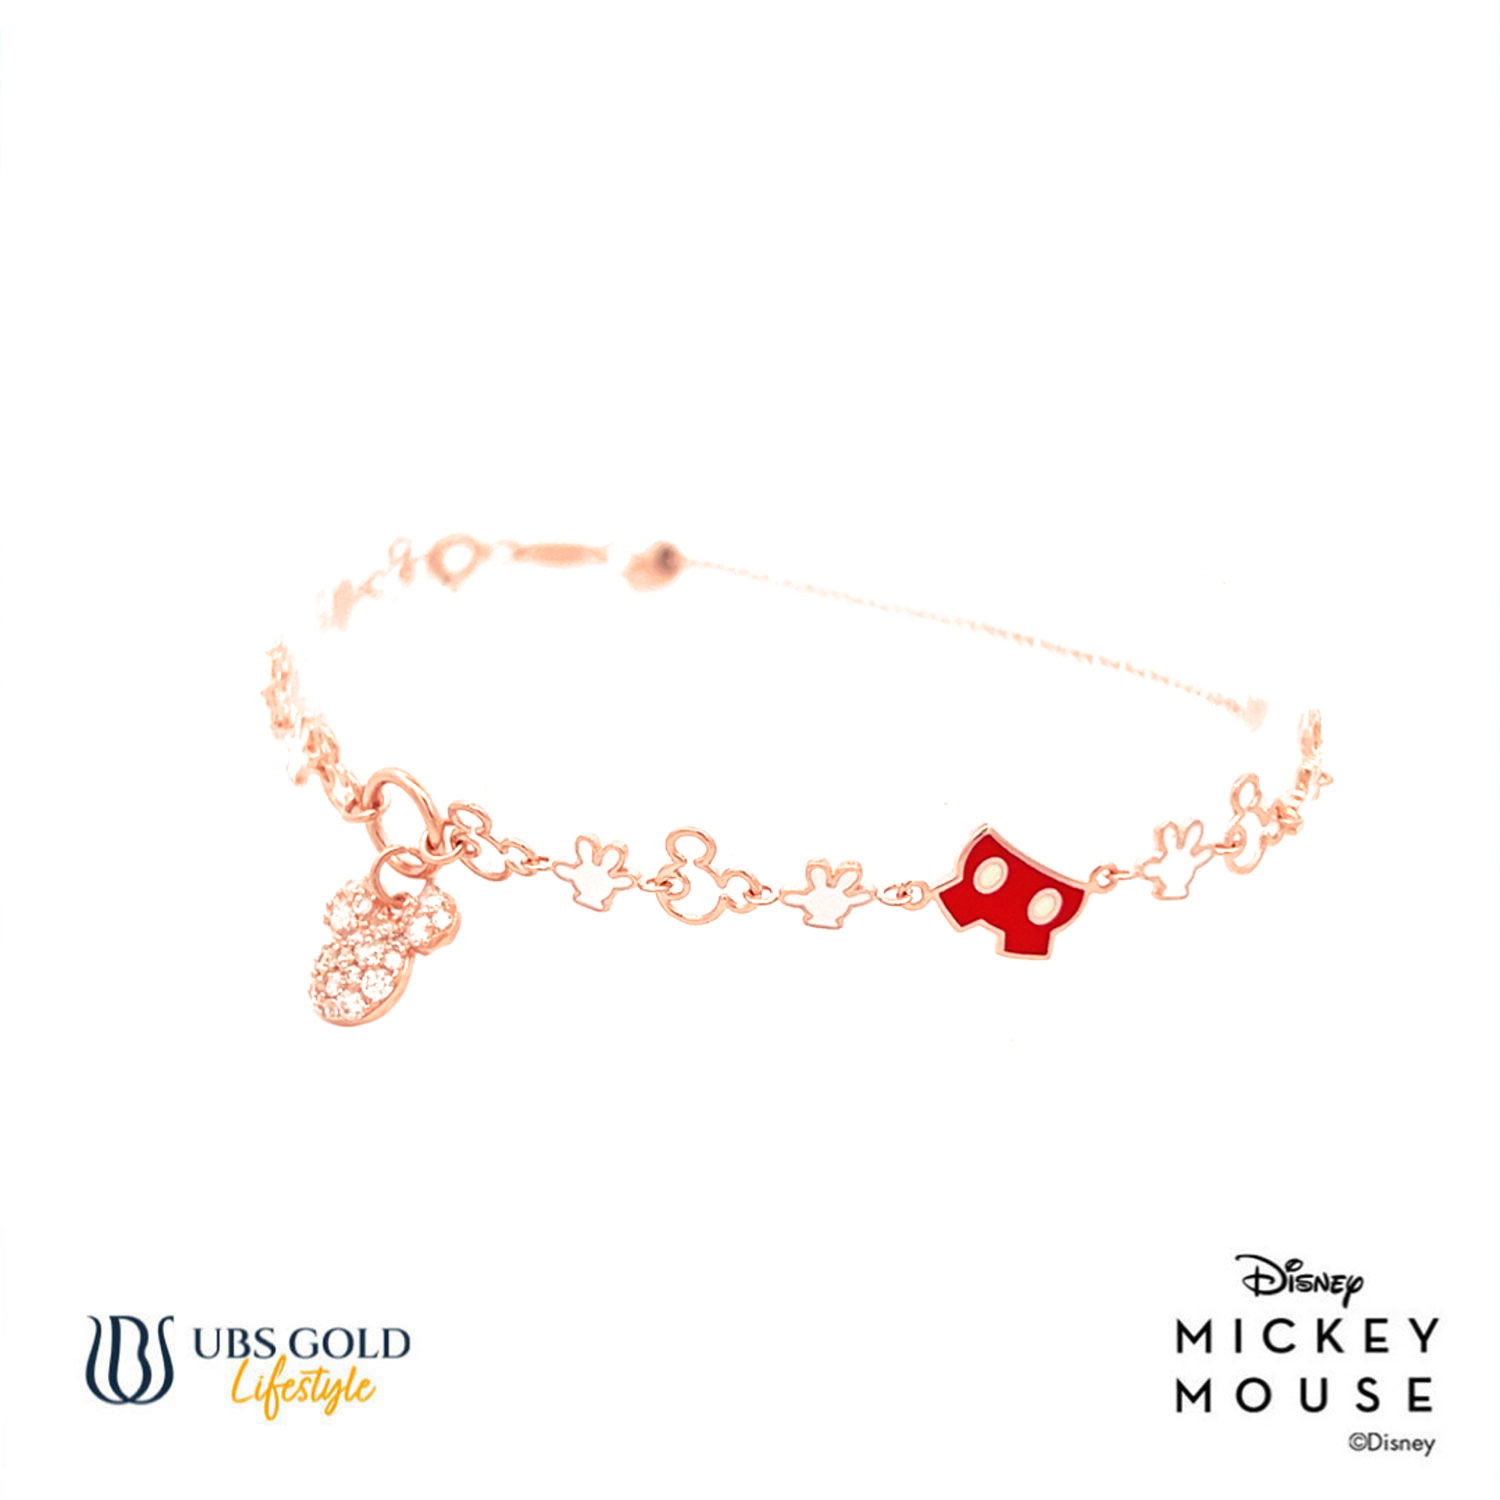 UBS Gold Gelang Emas Disney Mickey Mouse - Kgy0124 - 17K